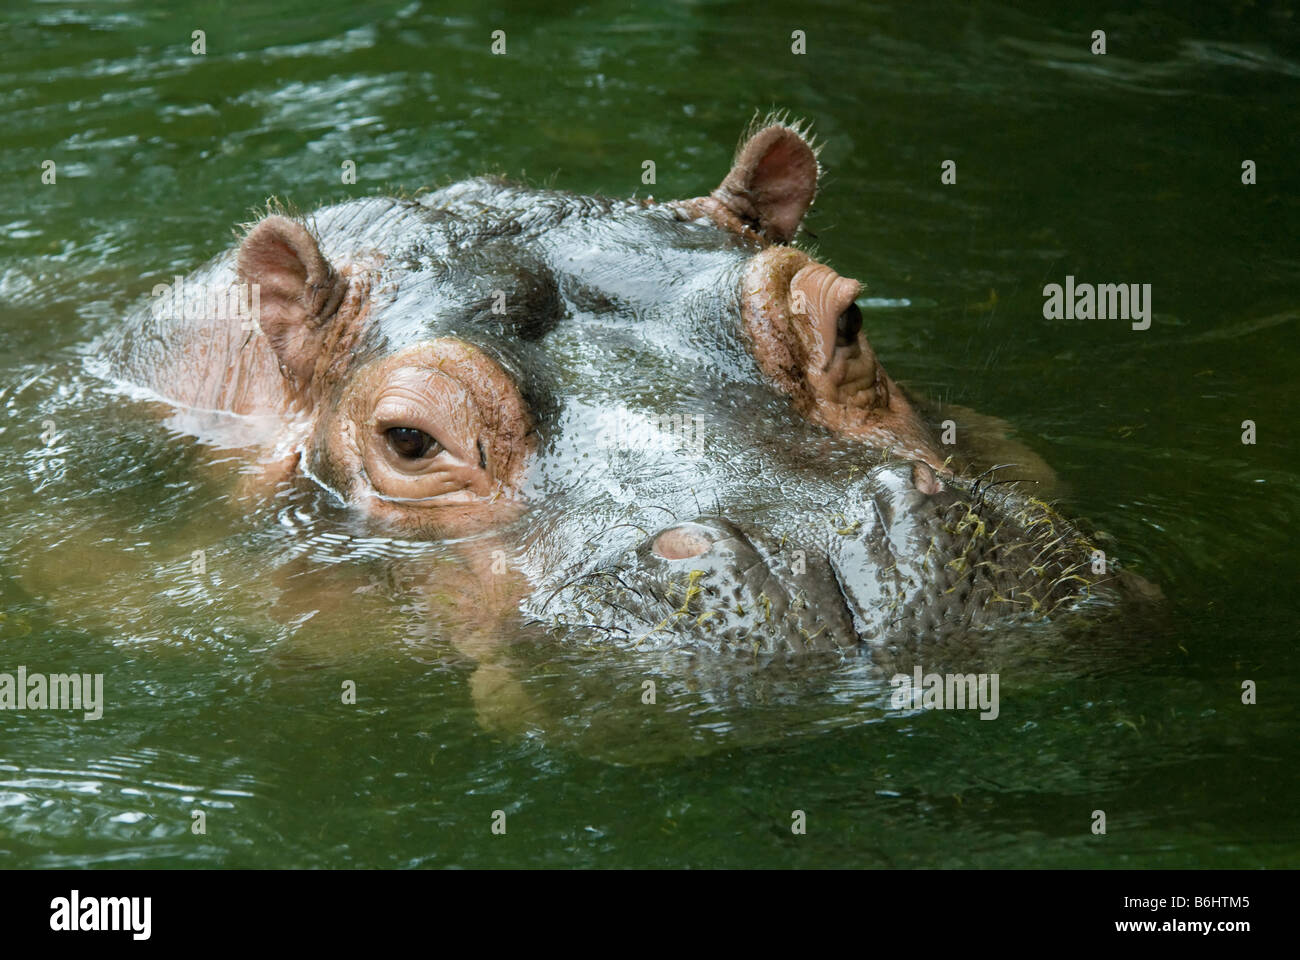 Hippo with head above water Stock Photo